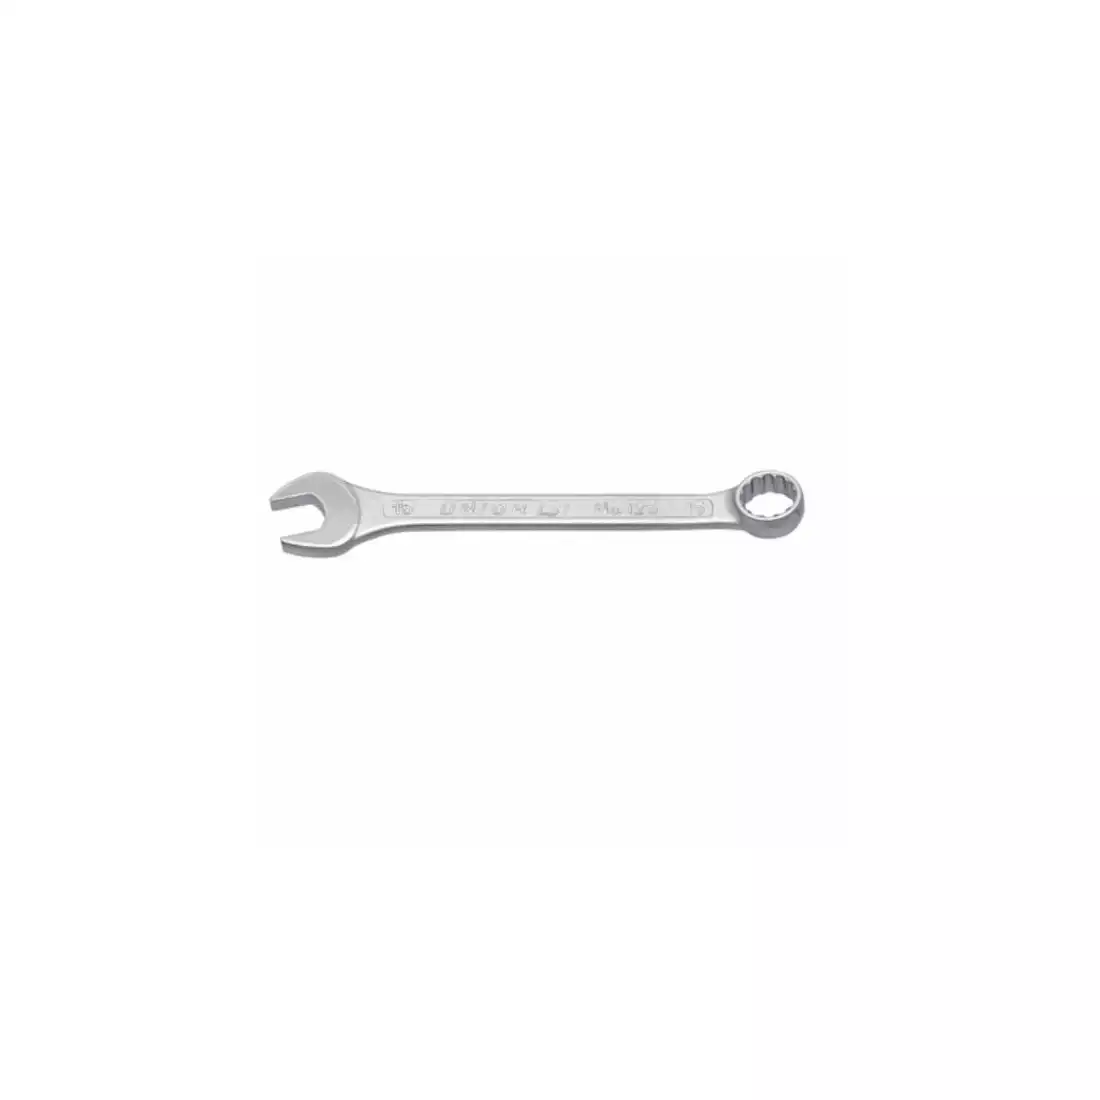 UNIOR combination wrench, short type 6 mm